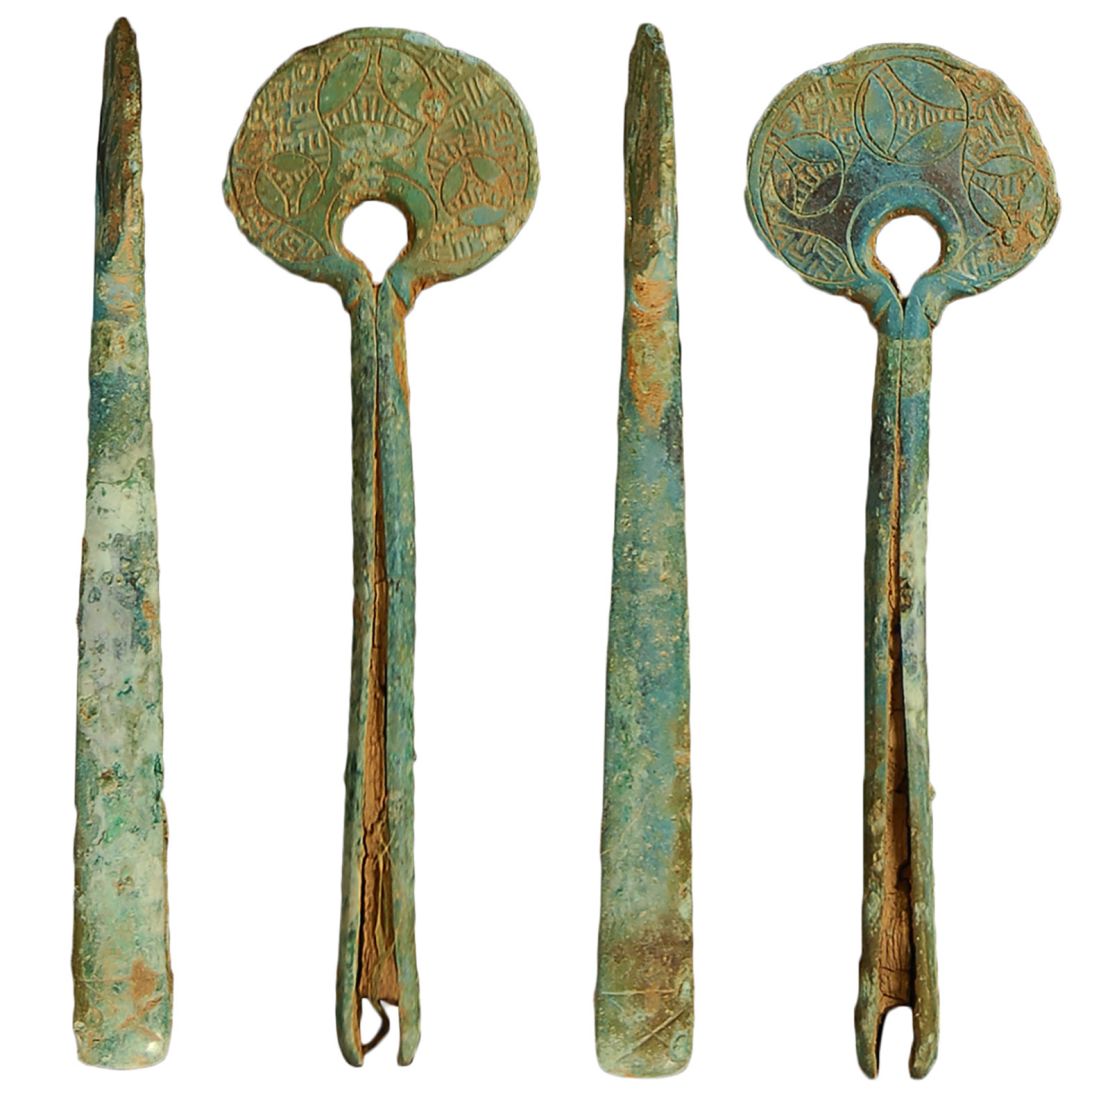 These tweezers were part of a collection of Iron Age goods believed to have been from a cremation burial.